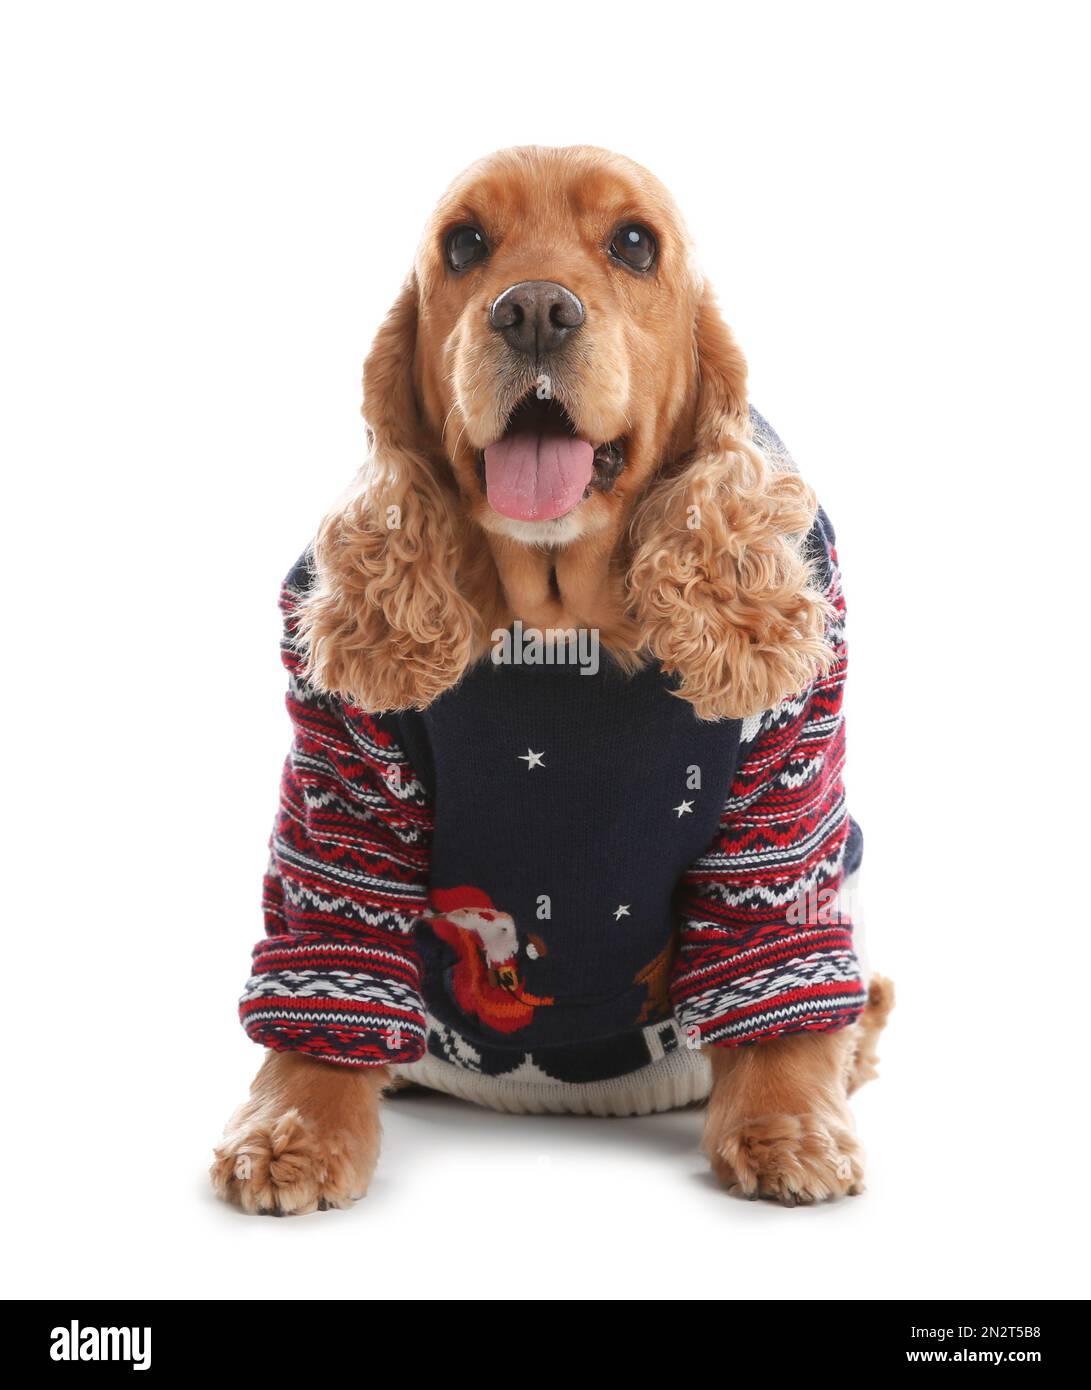 Adorable Cocker Spaniel in Christmas sweater on white background Stock Photo